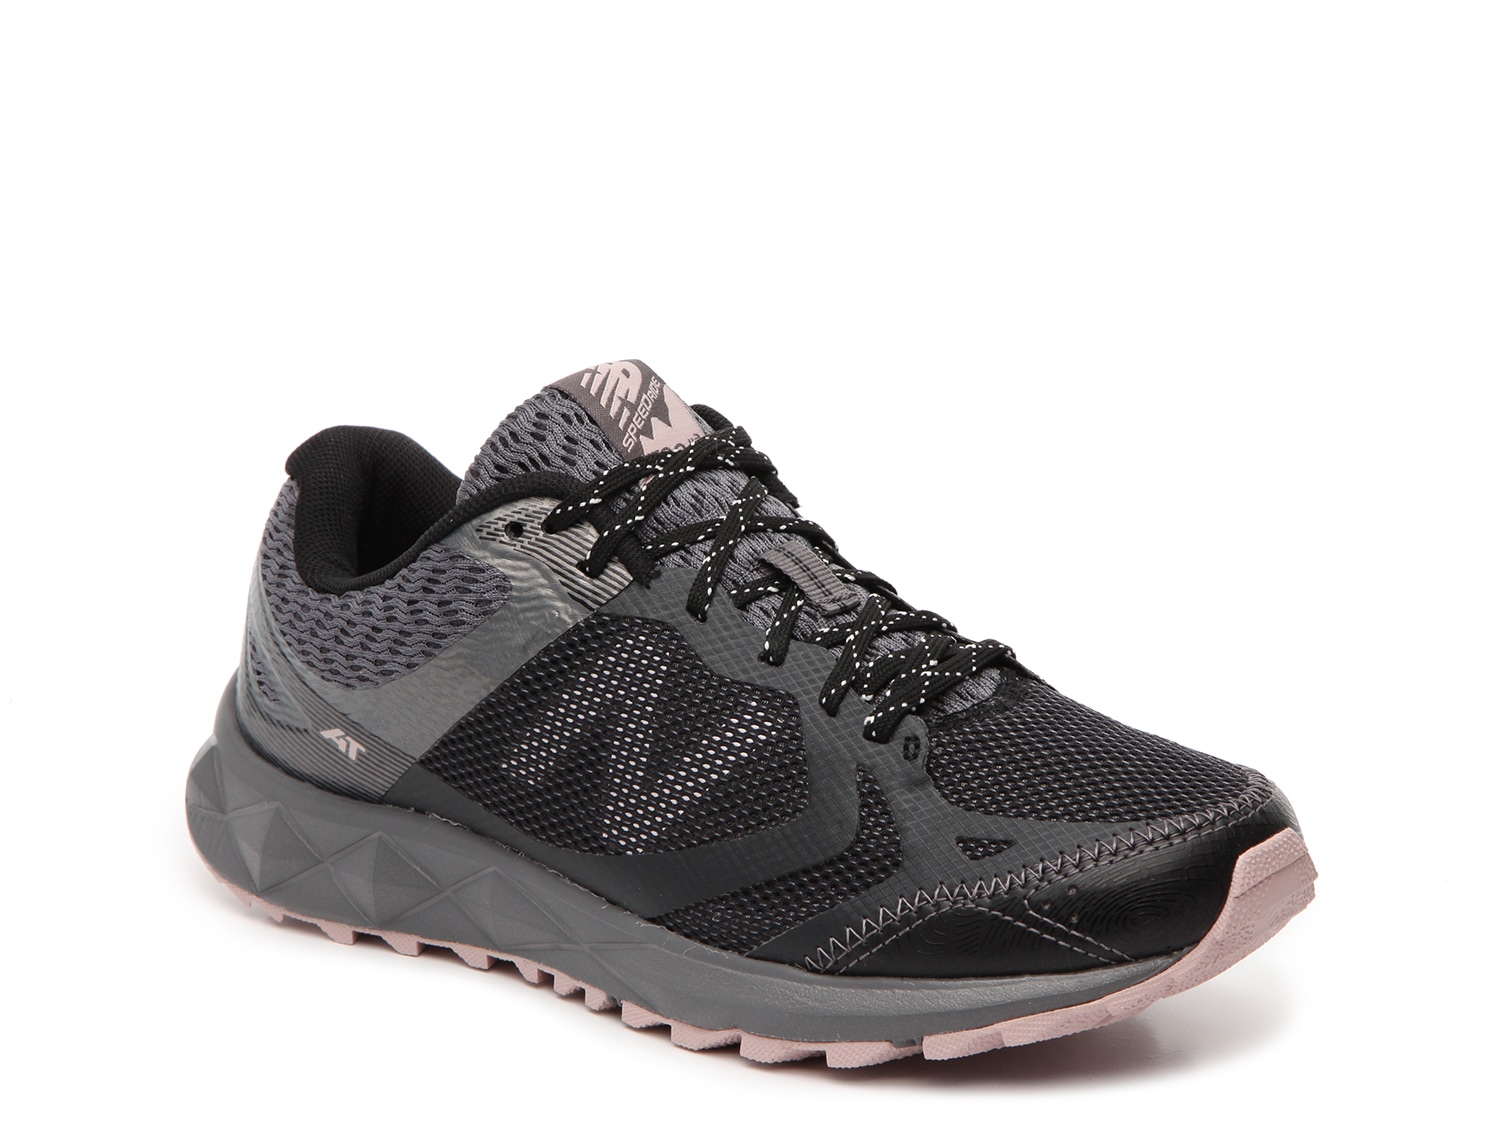 Sage police Variant New Balance 590 v3 Trail Running Shoe - Women's - Free Shipping | DSW